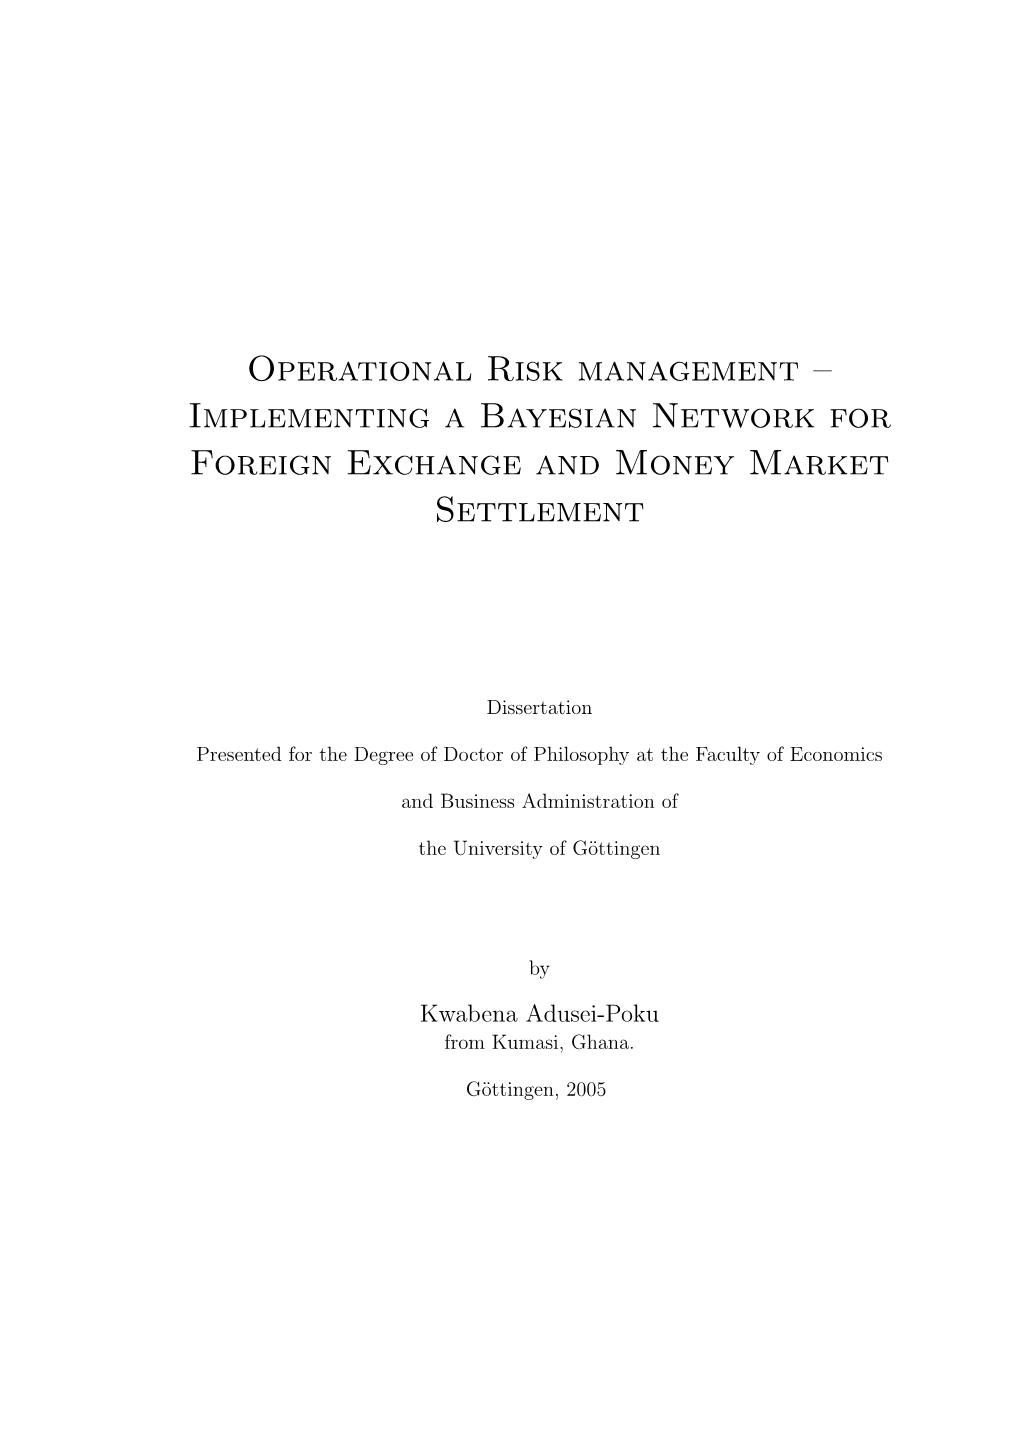 Operational Risk Management – Implementing a Bayesian Network for Foreign Exchange and Money Market Settlement